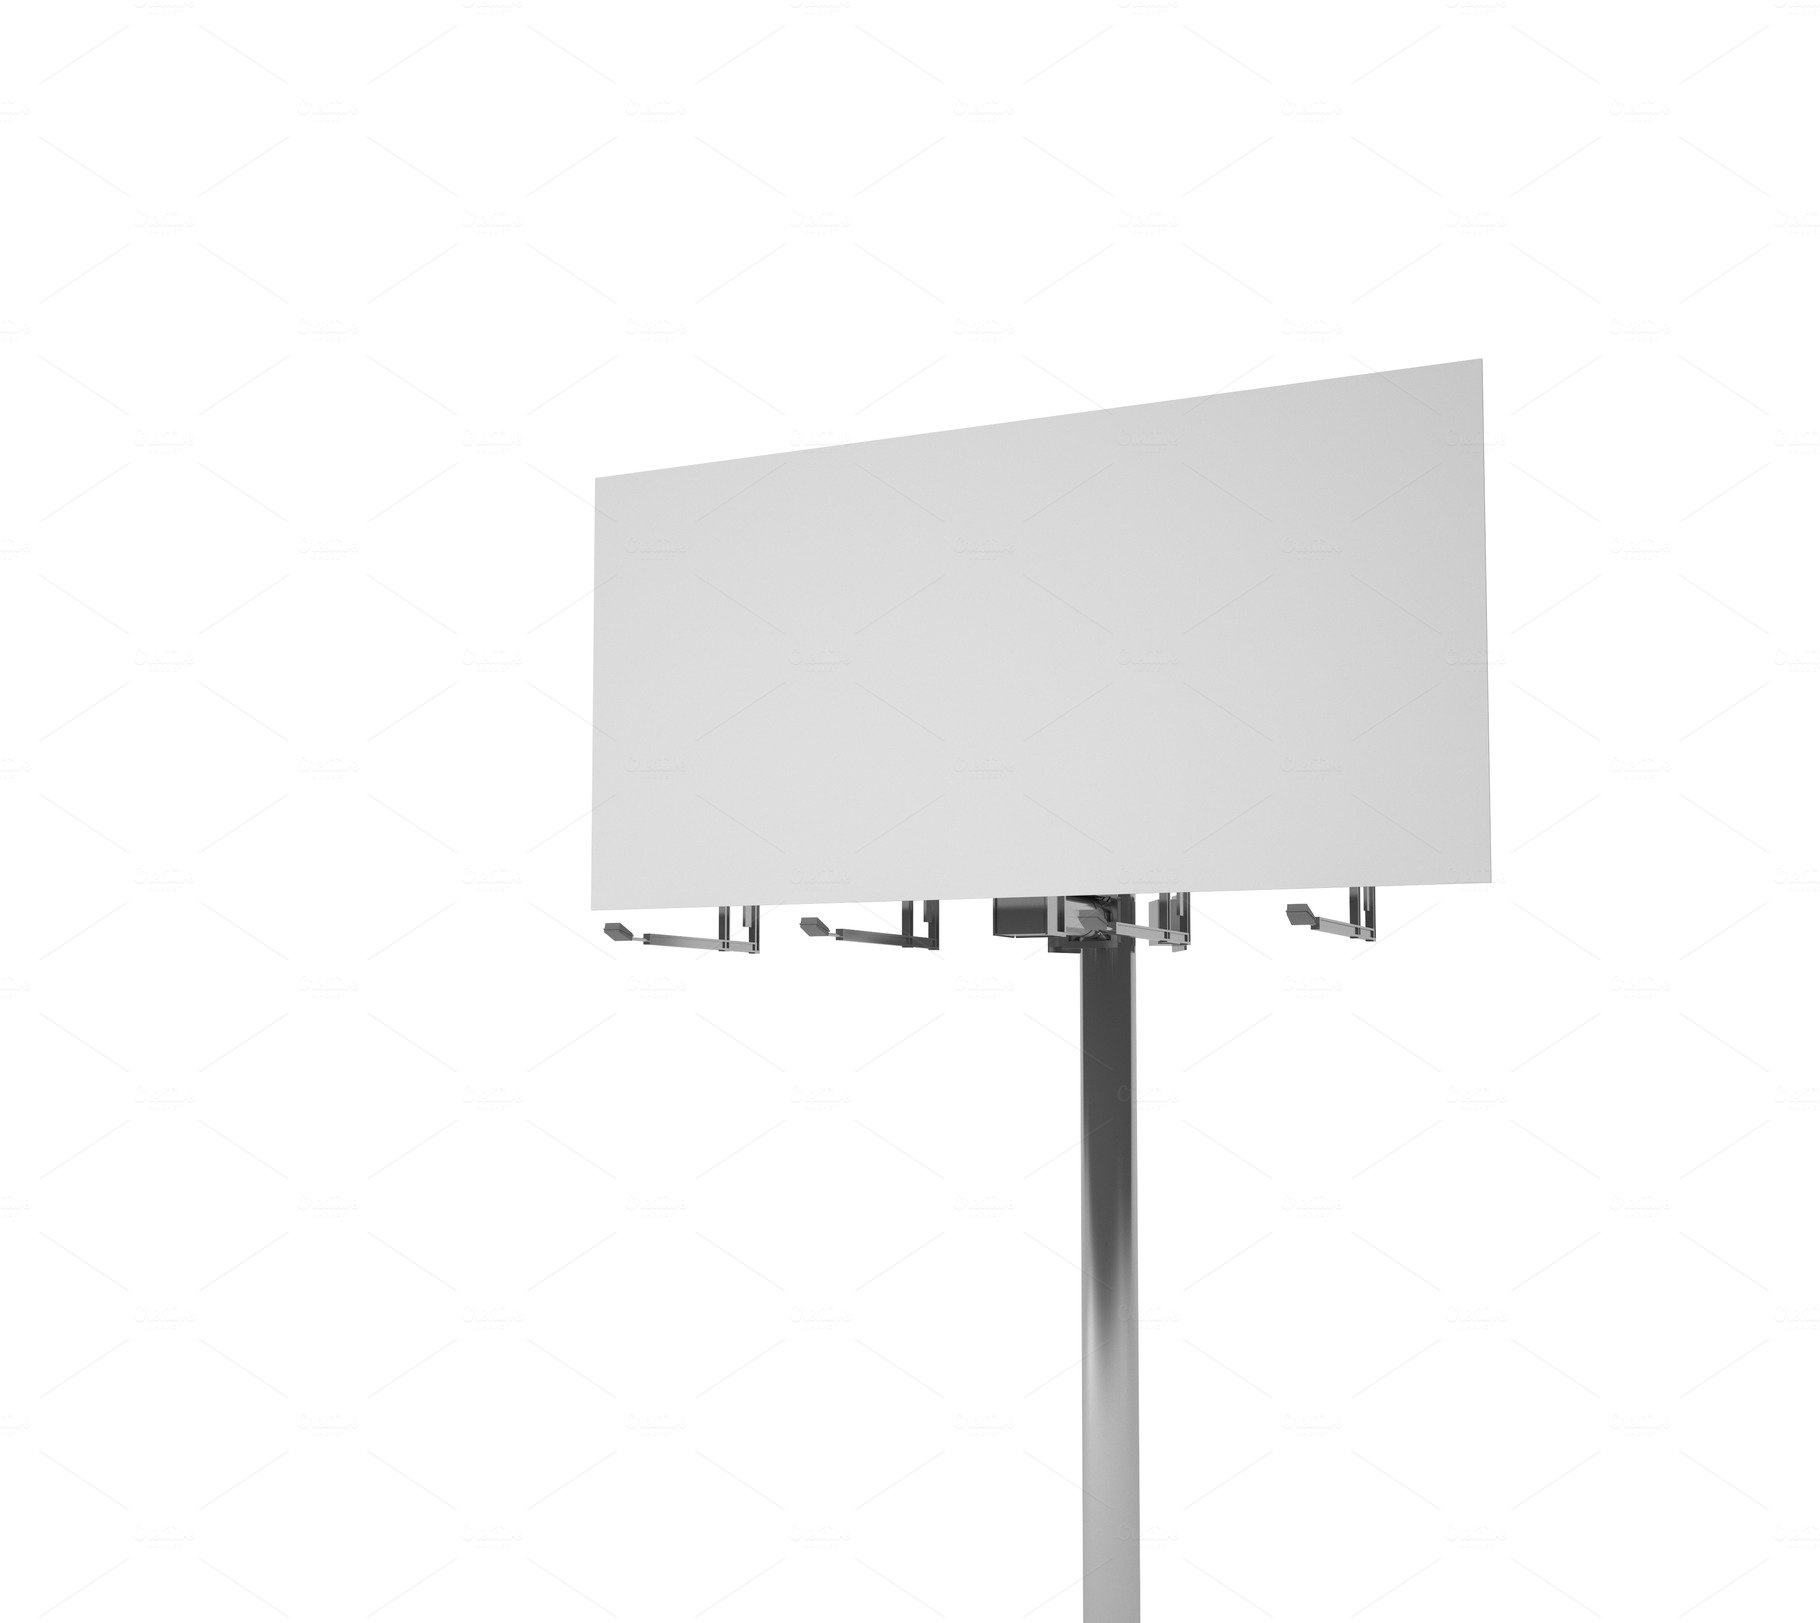 big and high blank billboard isolated on white background, clipping path in... cover image.